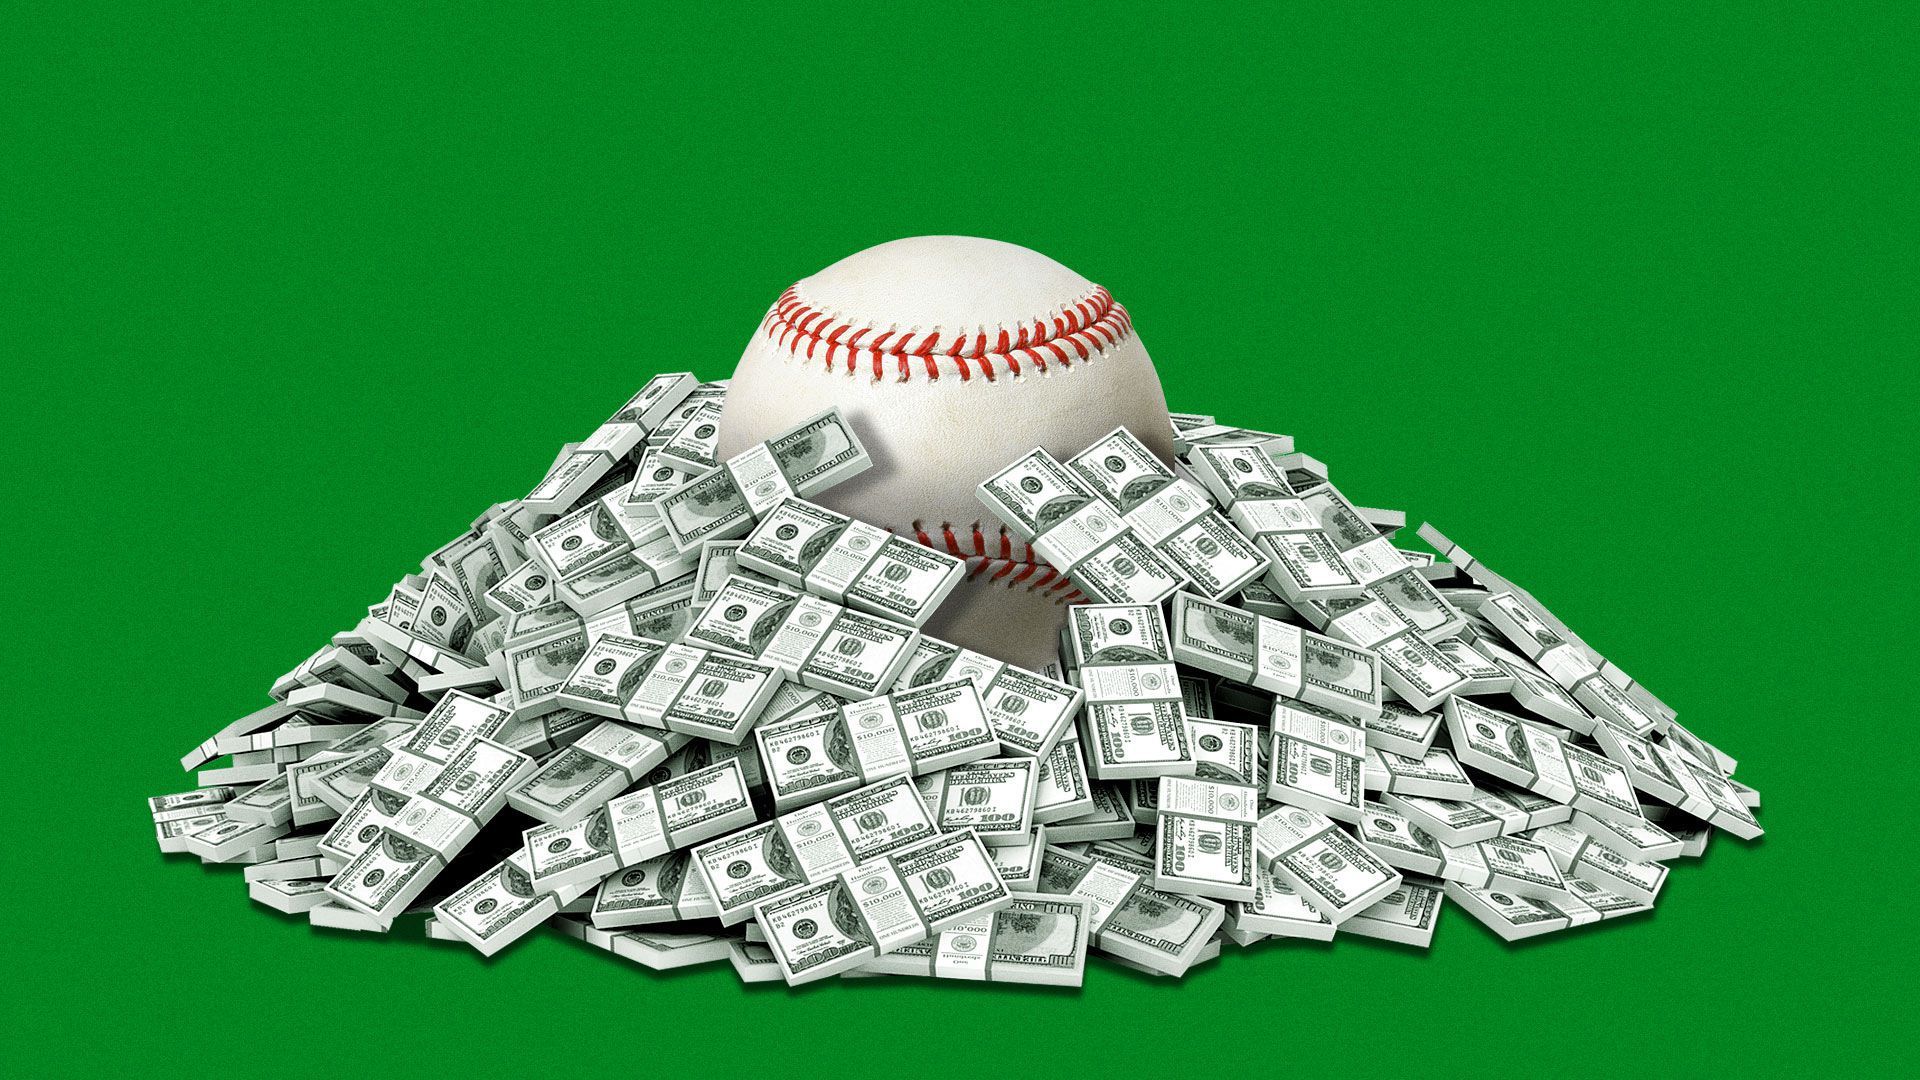 Illustration of a baseball in a pile of cash.